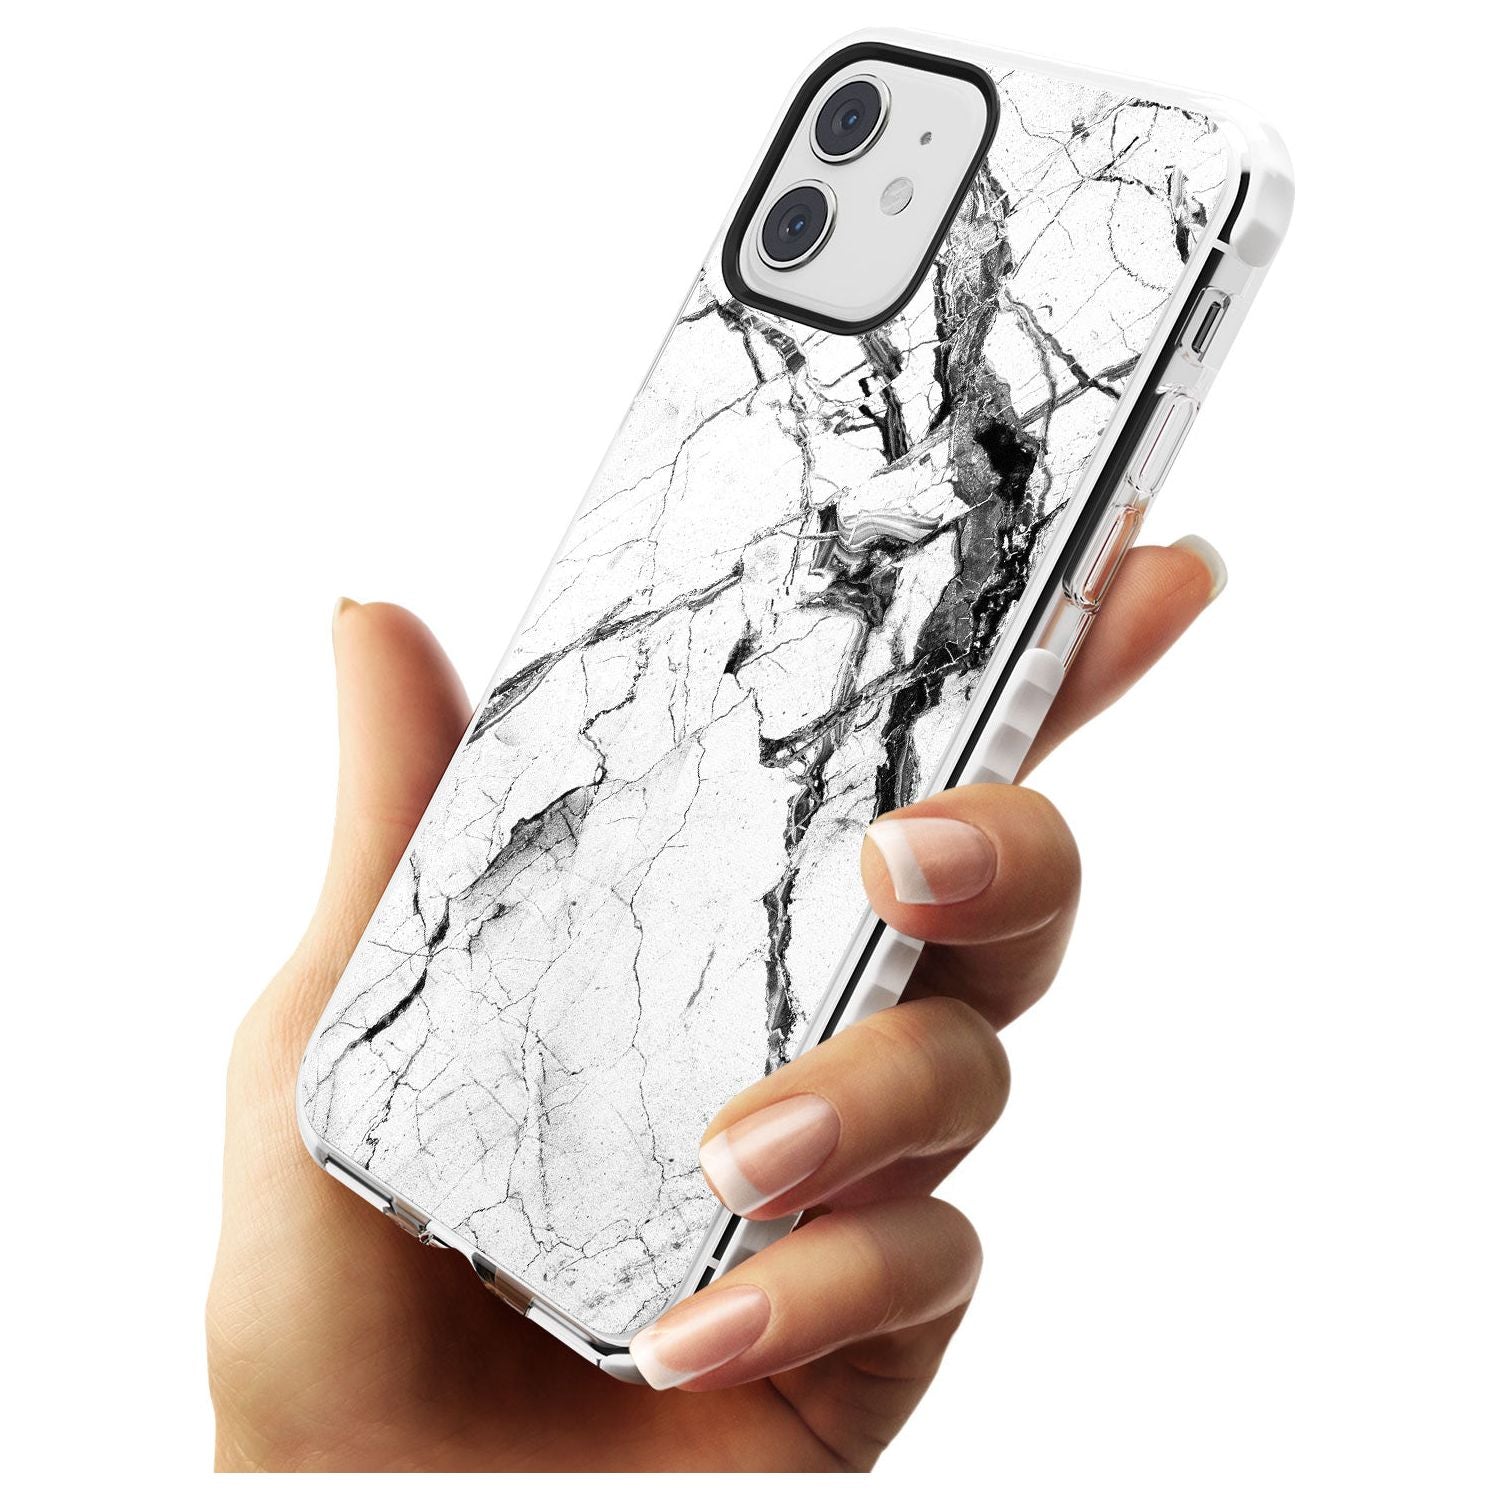 Black & White Stormy Marble Impact Phone Case for iPhone 11